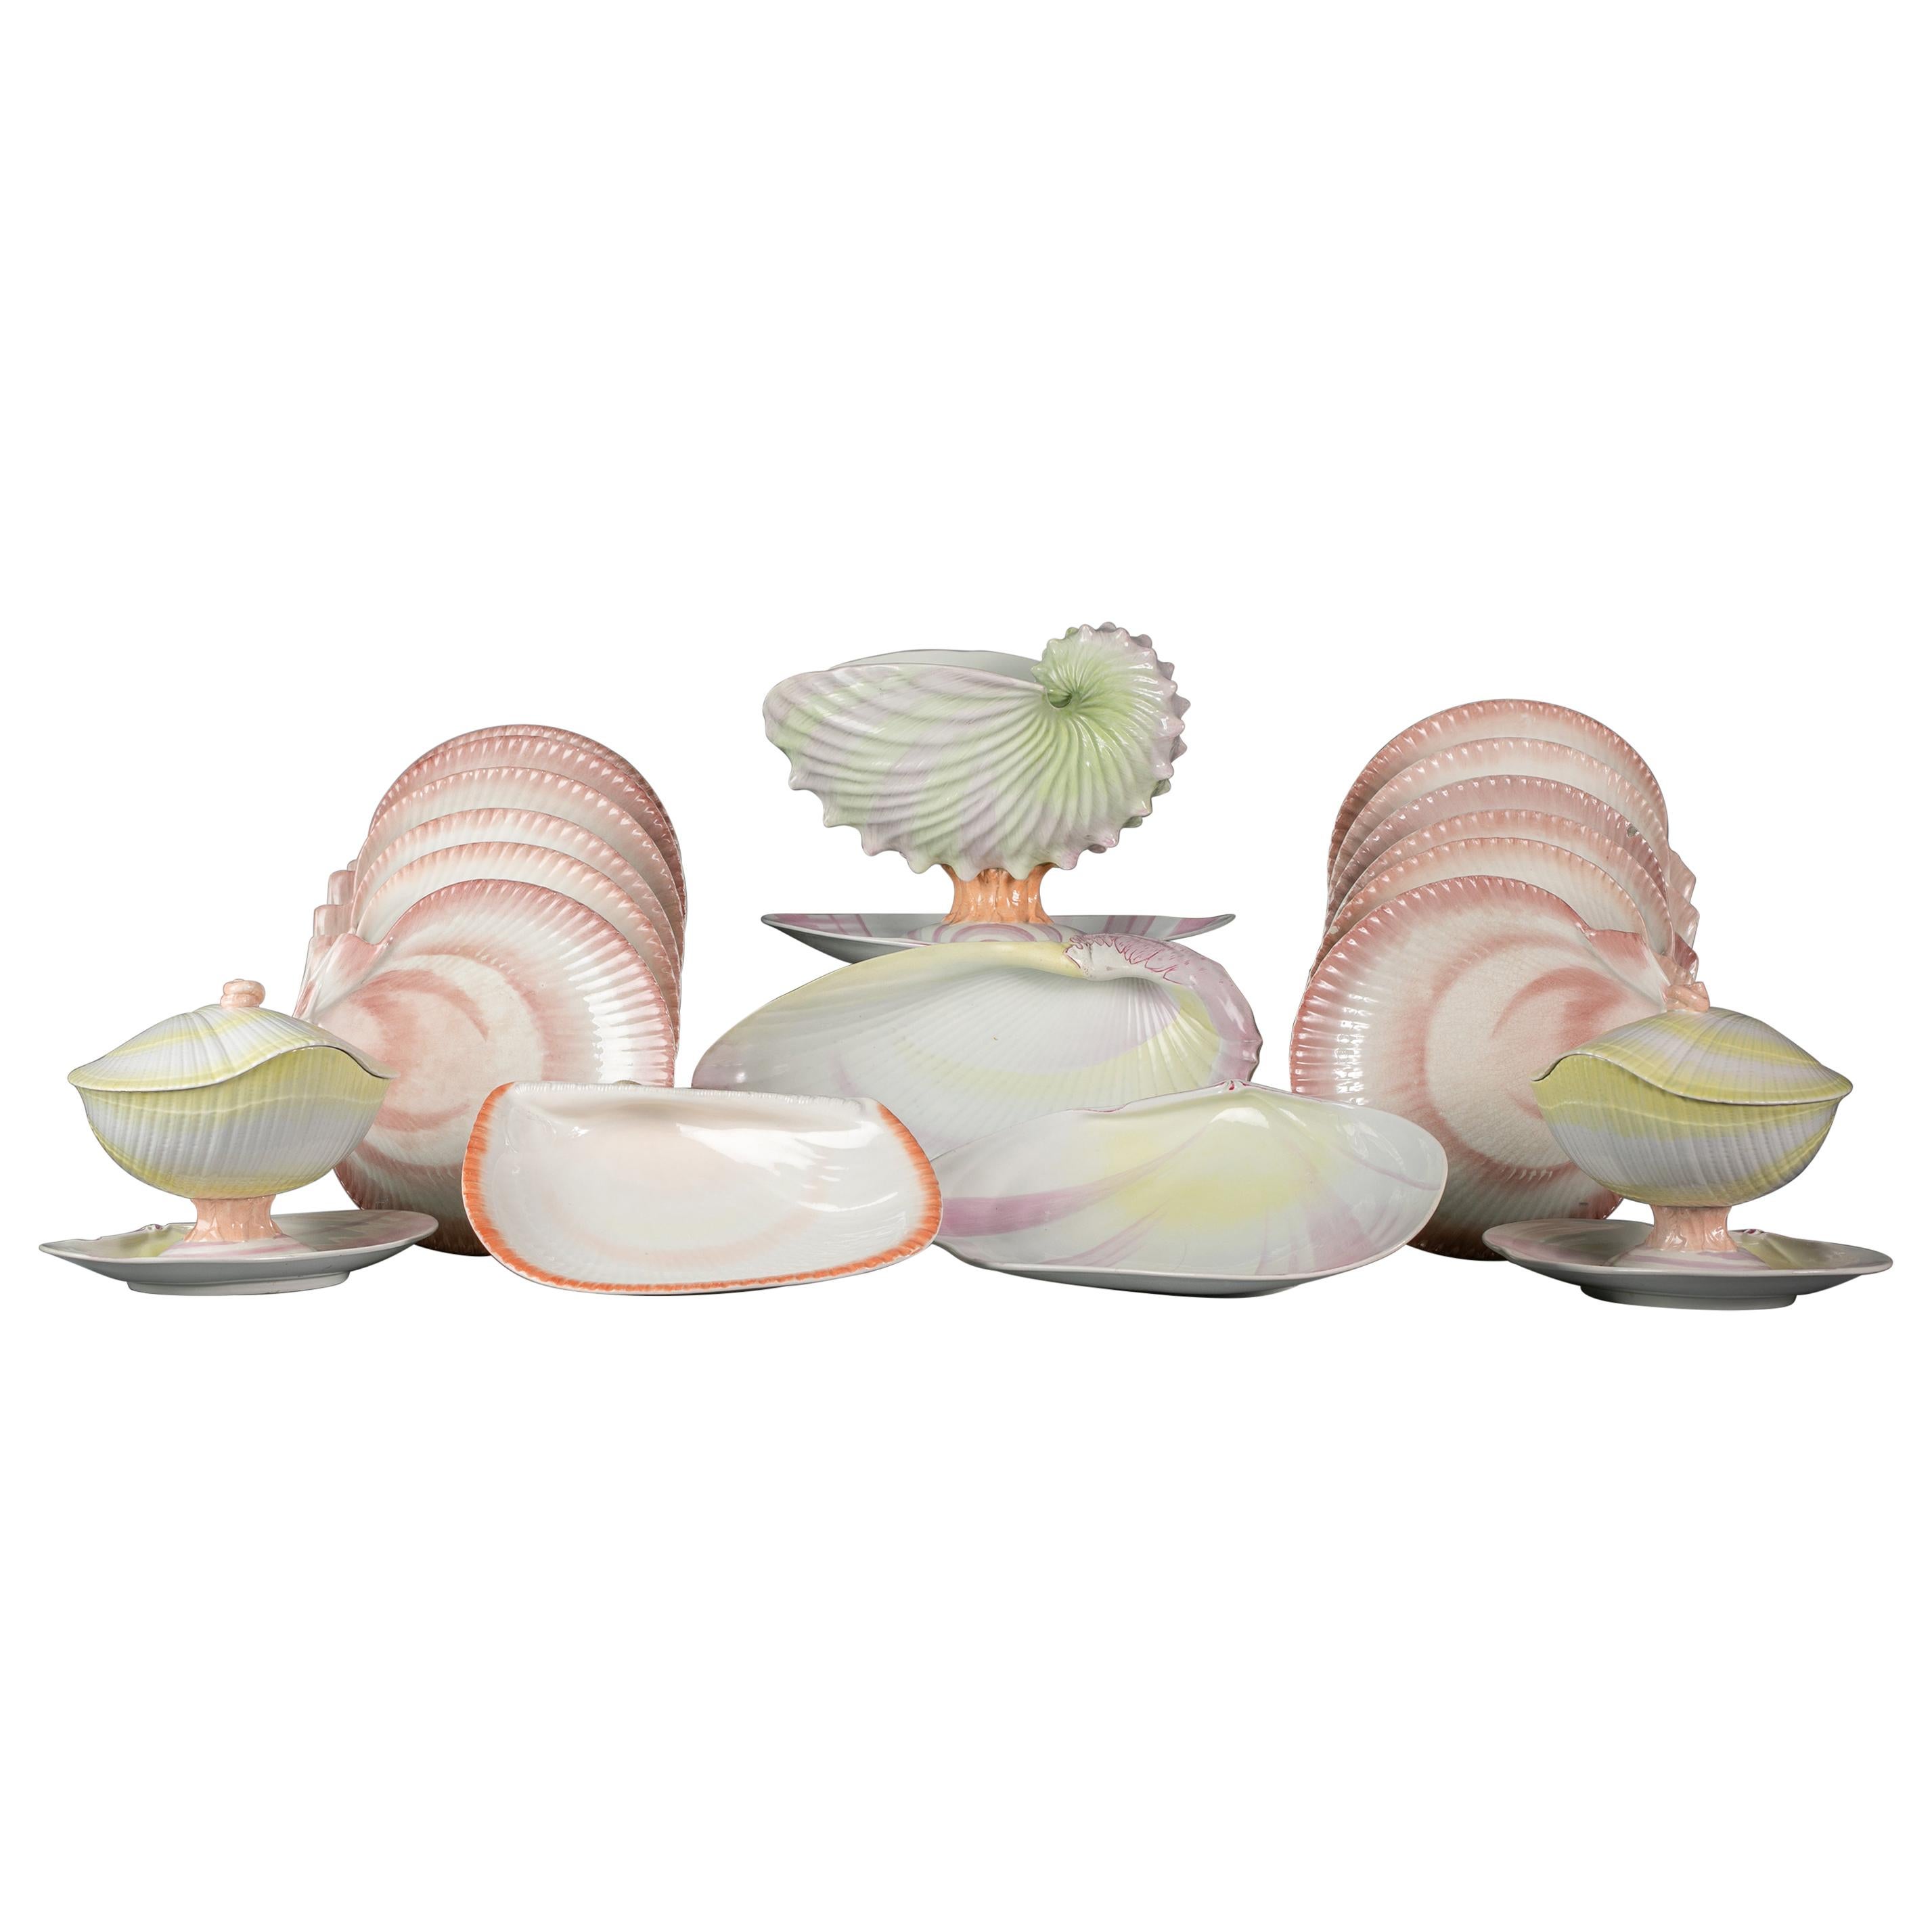 Large and Assembled Wedgwood 'Wreathed Shell' Part Dessert Service, circa 1815